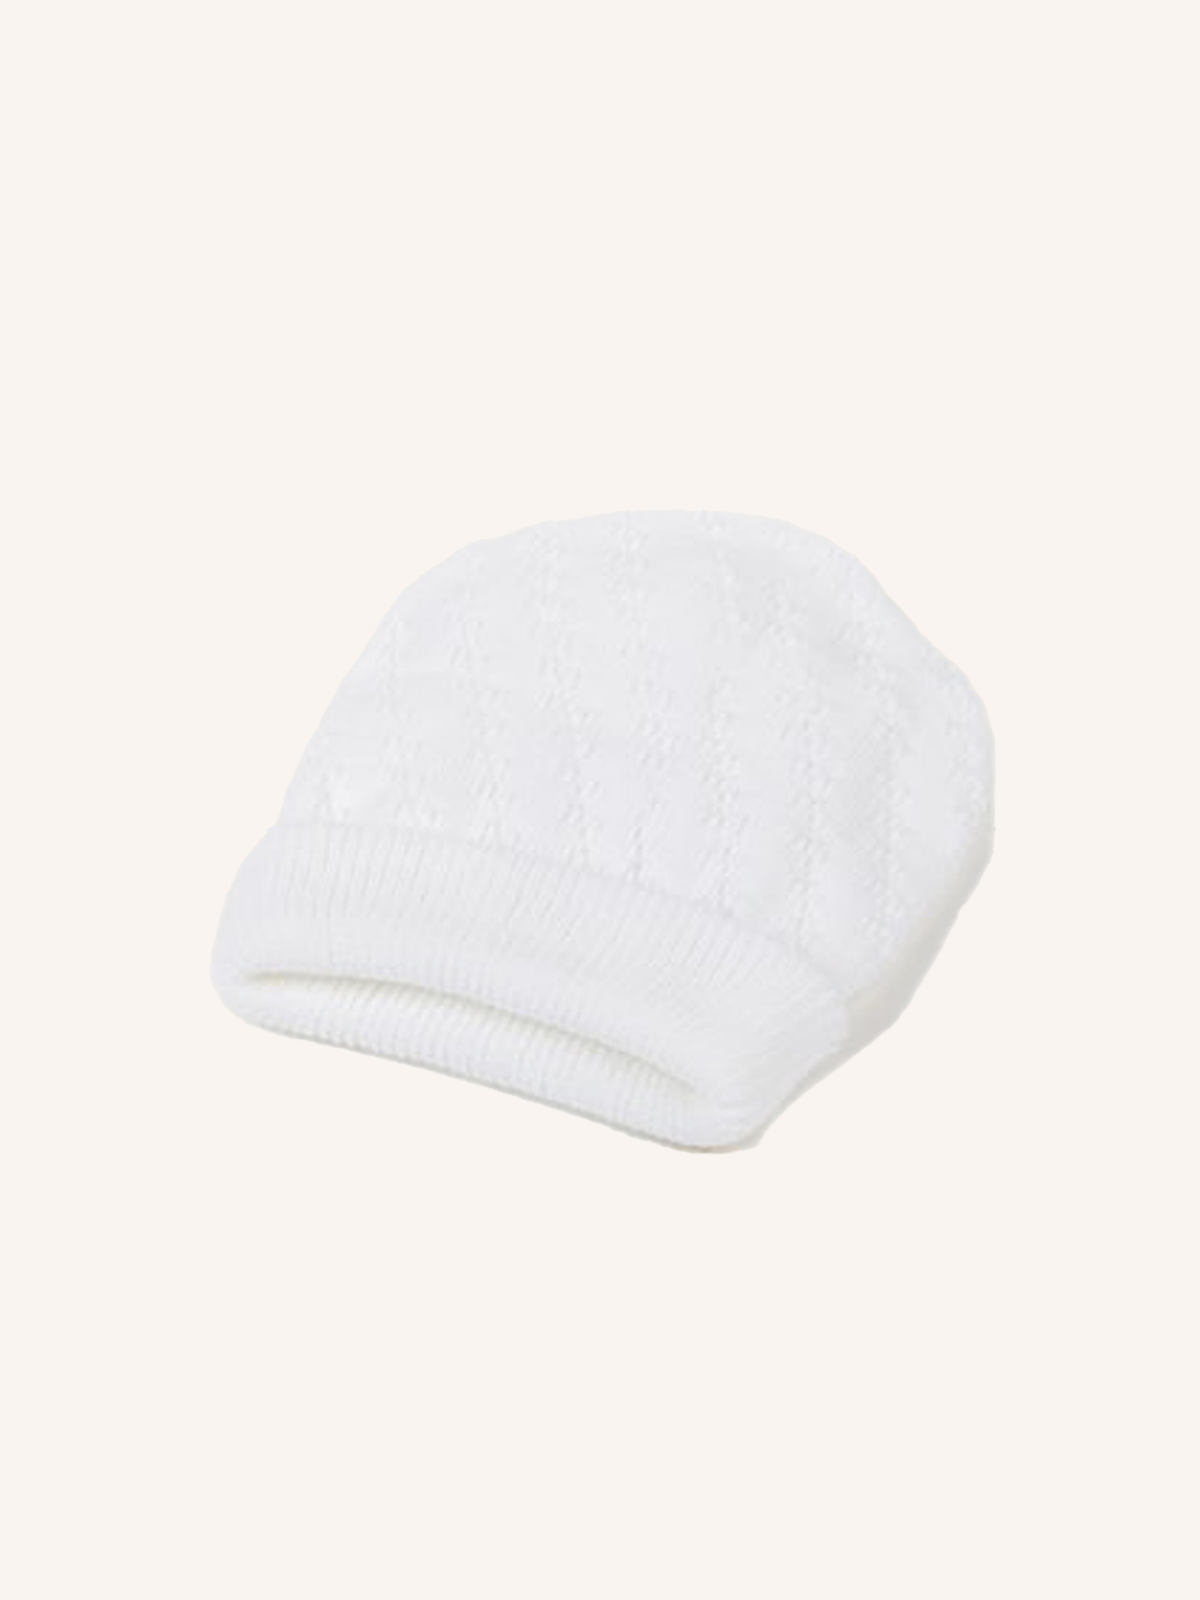 Patterned Beanie for Newborn | Solid Color | Single Pack | 41997